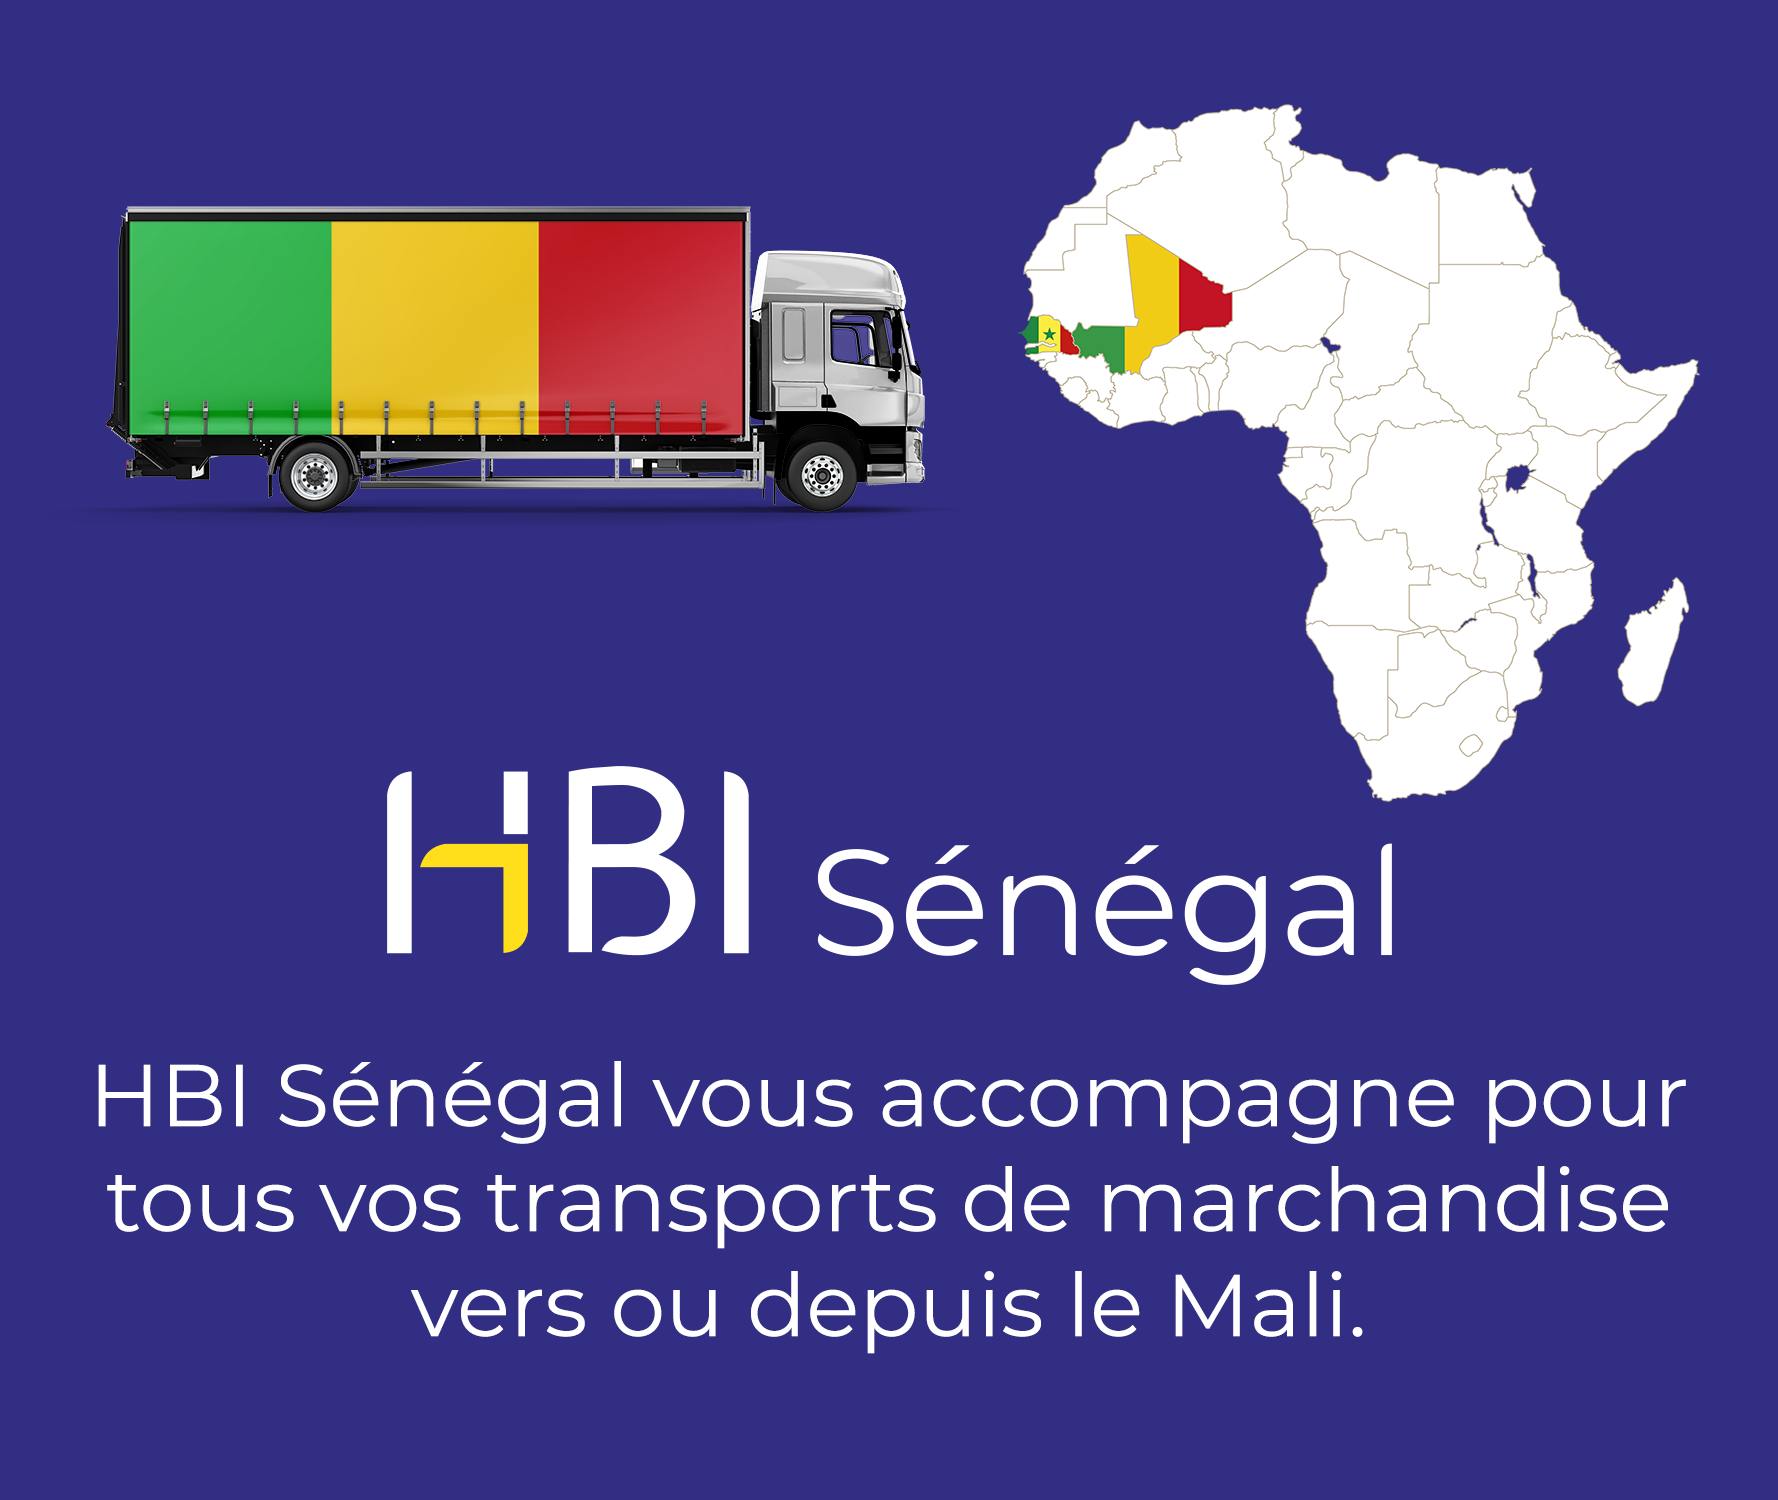 You are currently viewing HBI Senegal soon to resume trade with Mali. 🇸🇳 🇲🇱